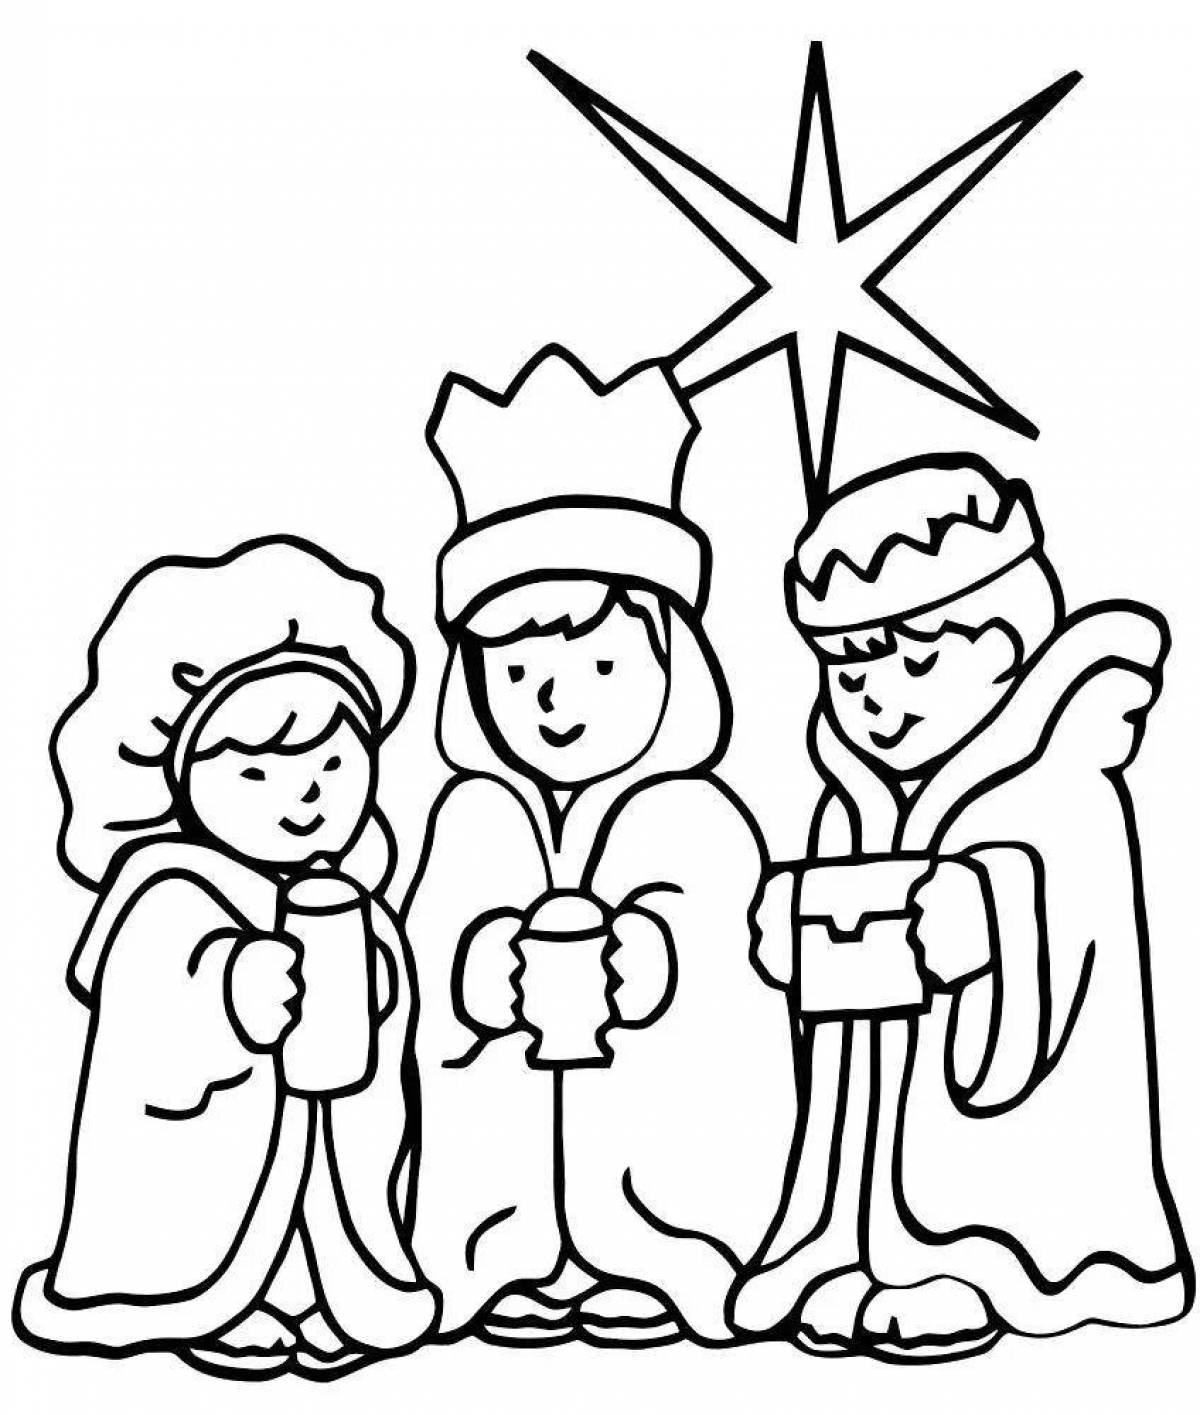 Radiant carolers coloring page